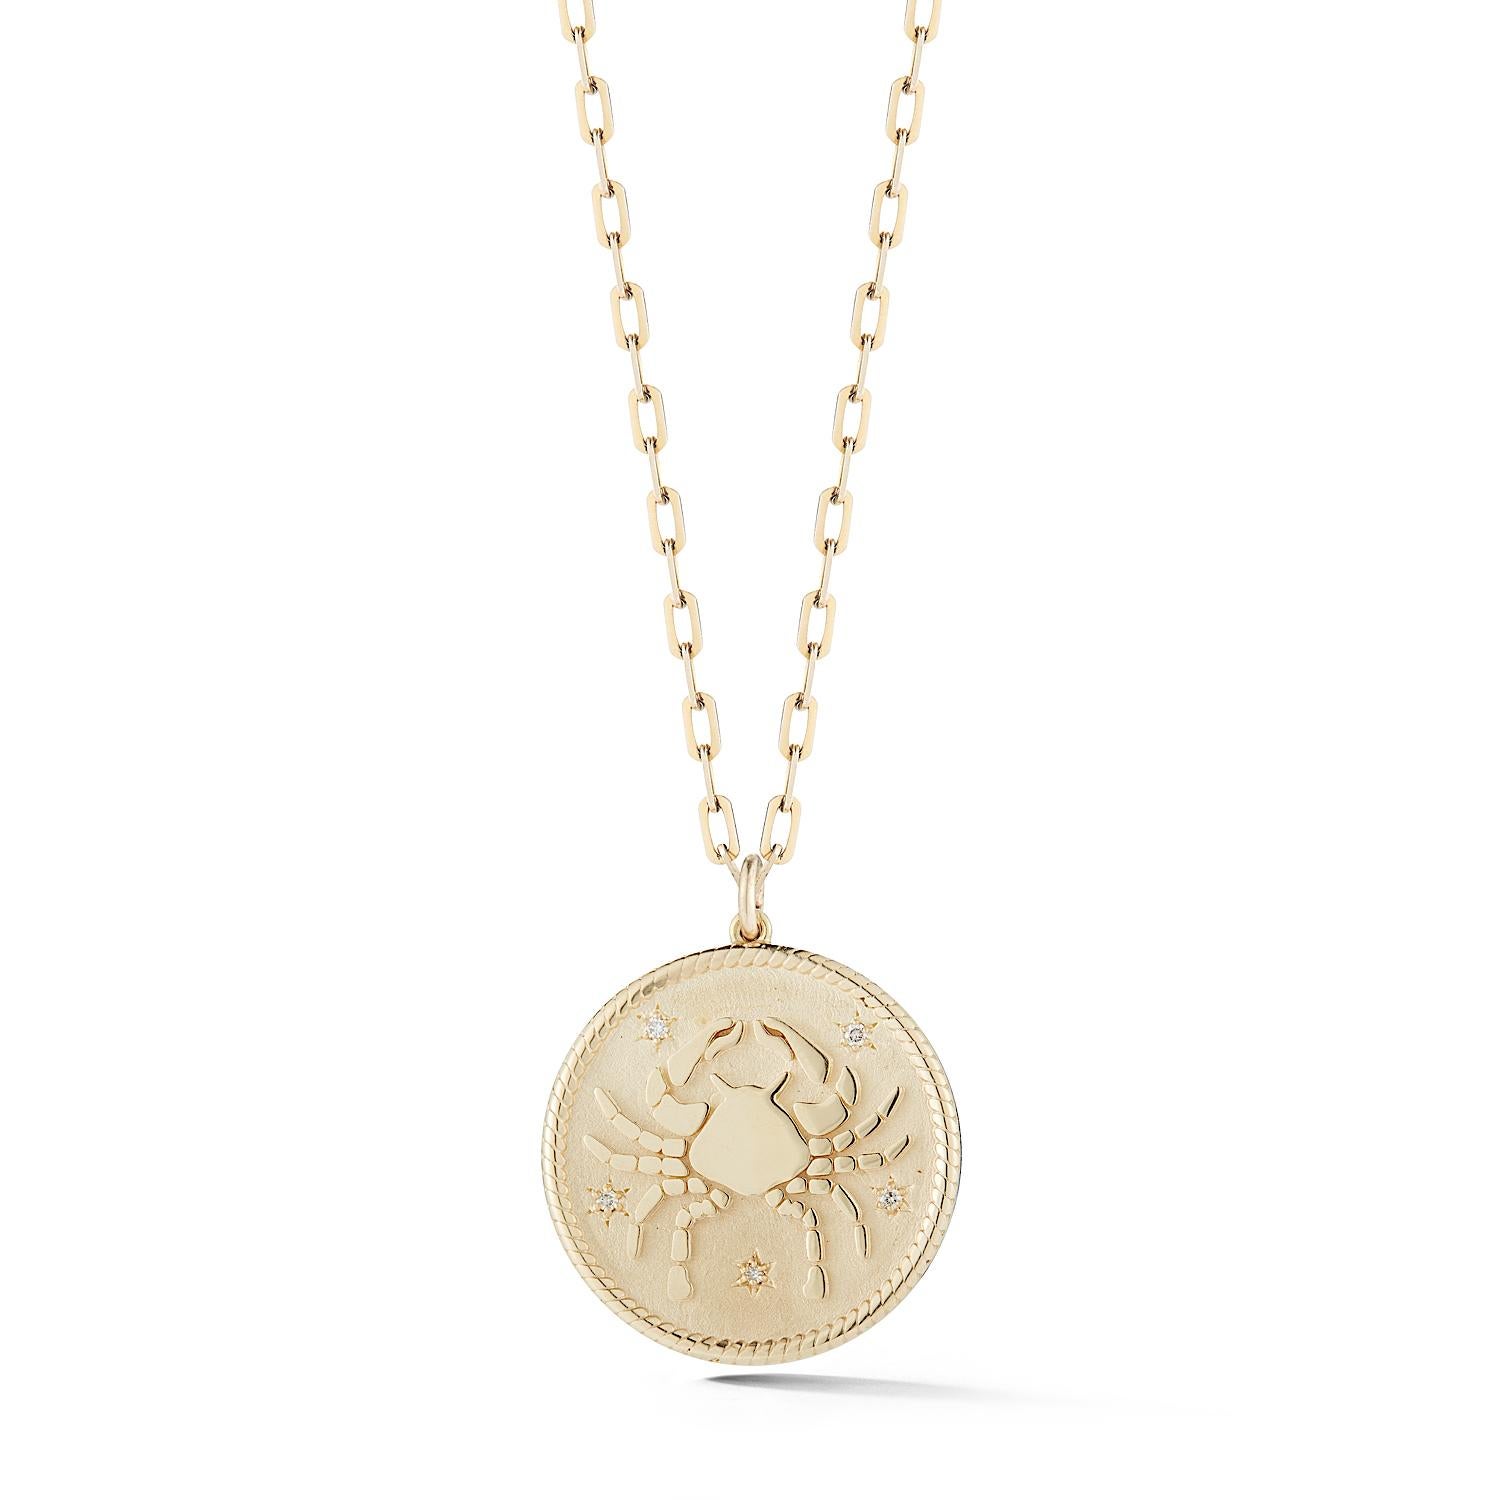 Garland Collection Diamond and Gold Aquarius Zodiac Medallion For Sale 12